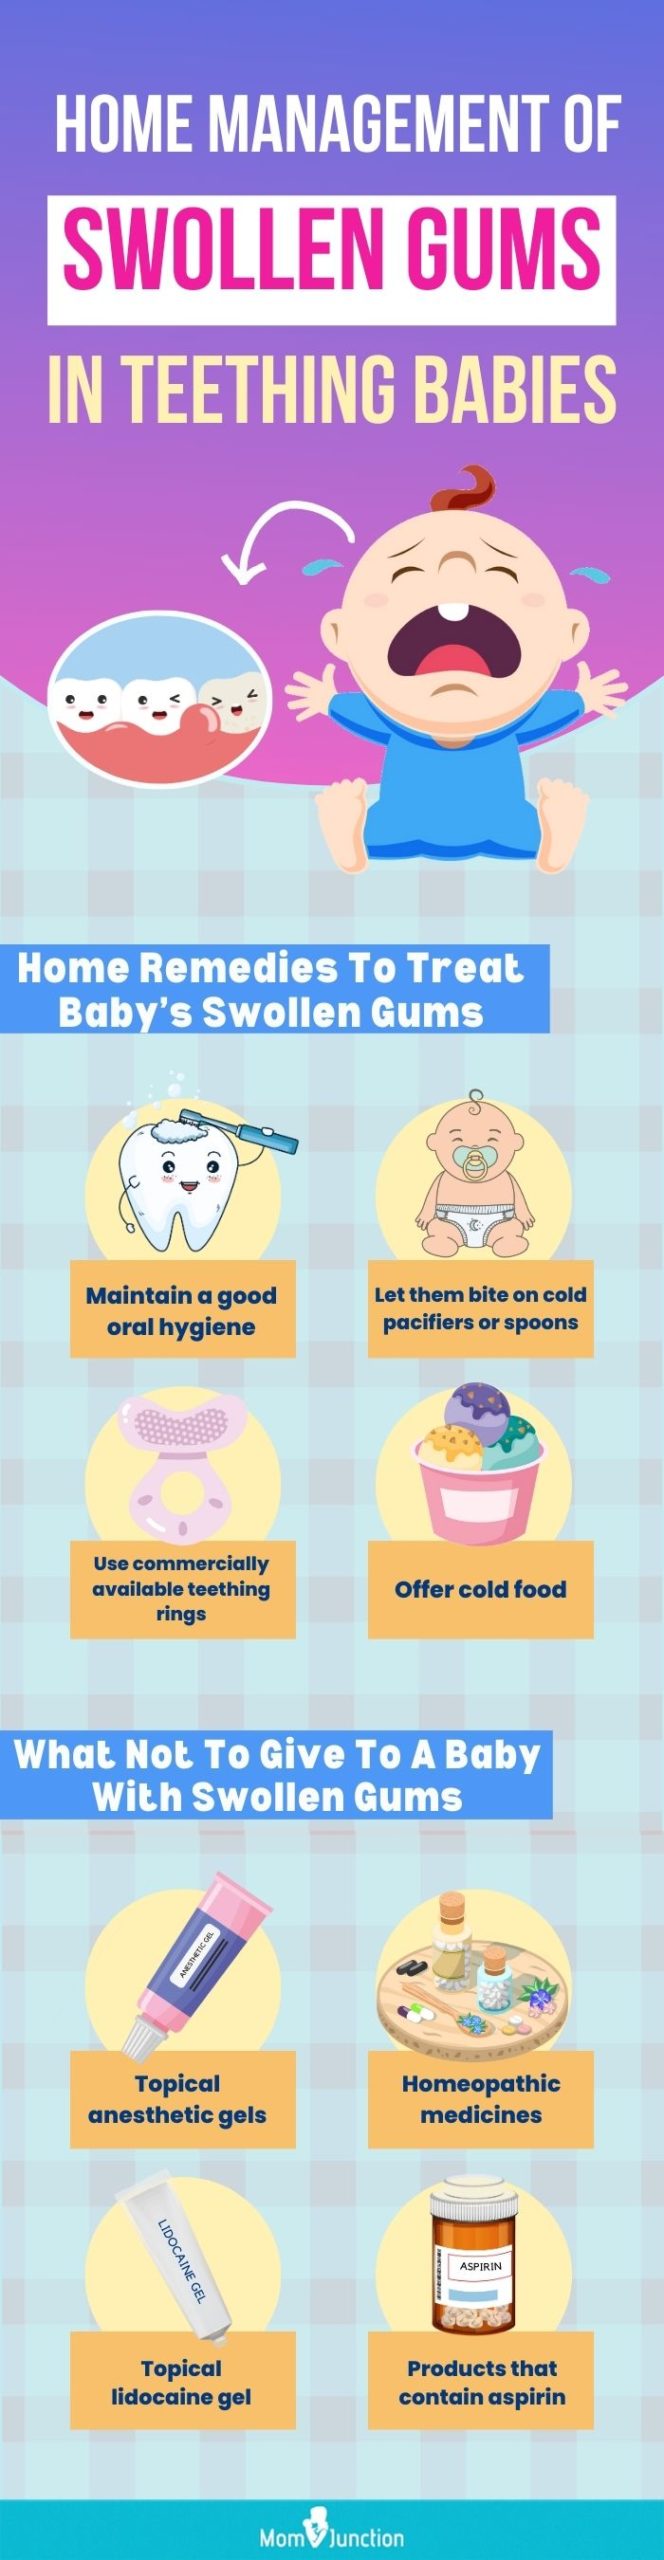 home management of swollen gums in teething babies [infographic]